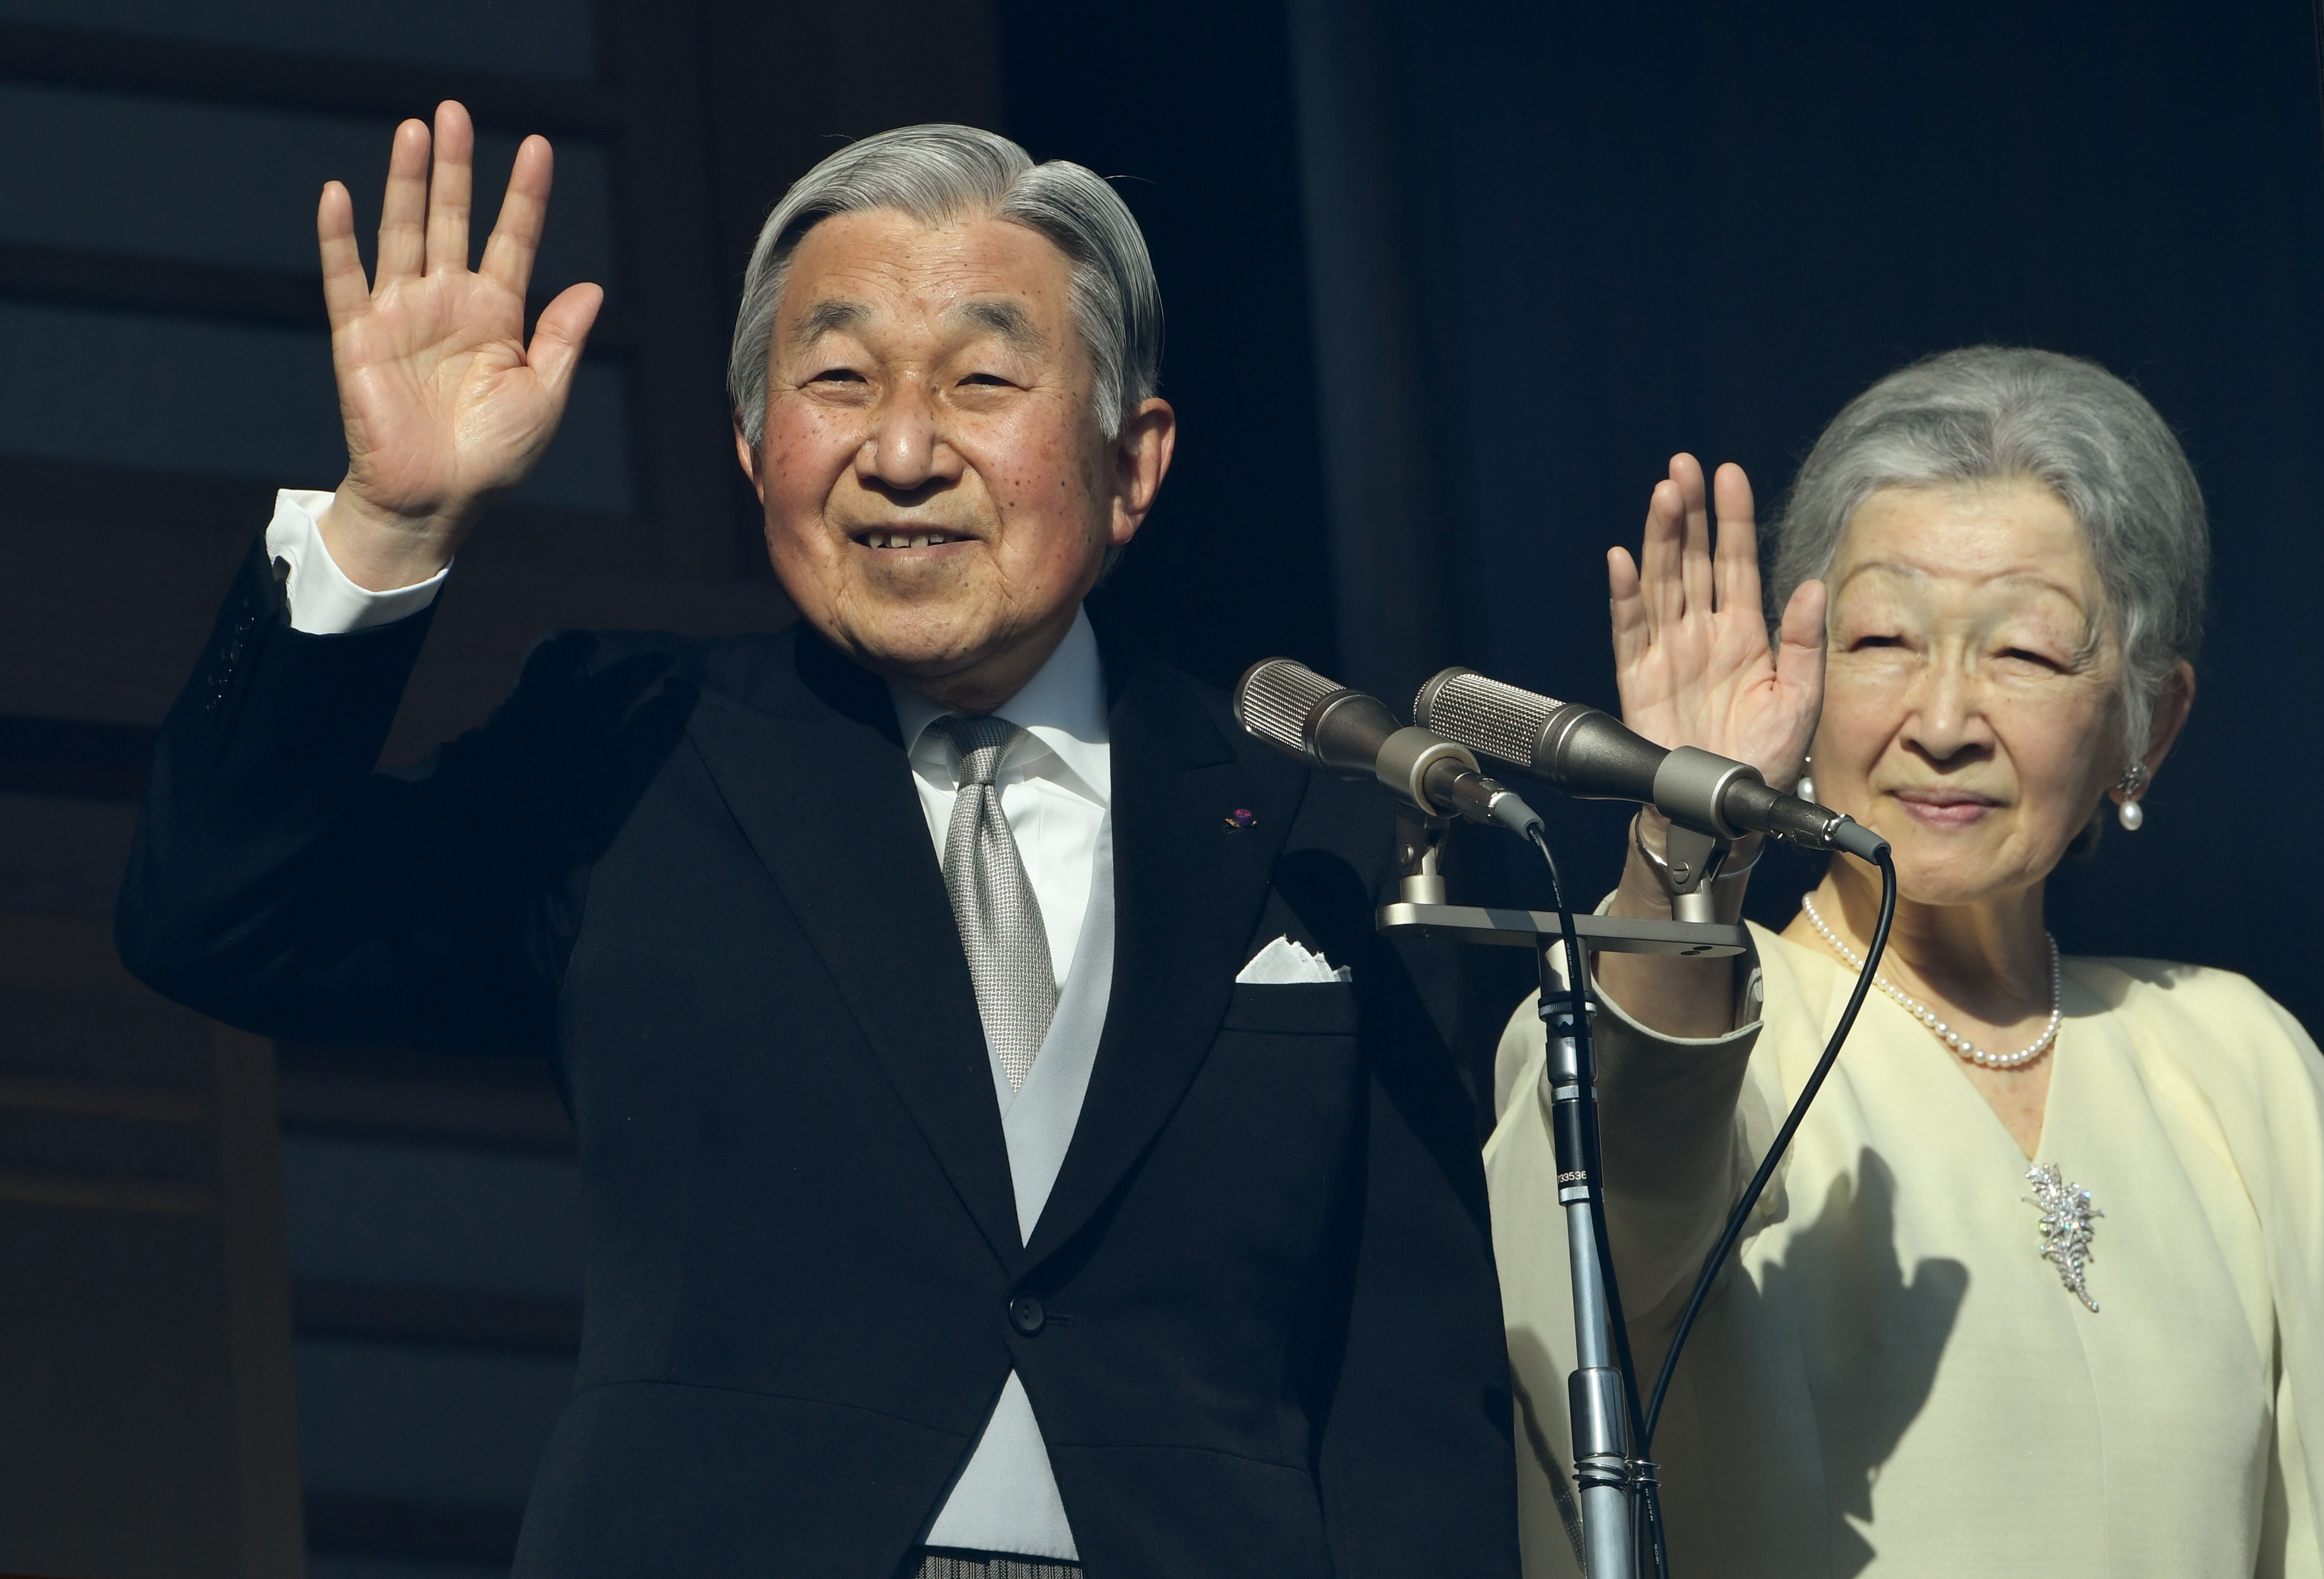 Japanese Emperor Akihito and Empress Michiko wave to well-wishers on the balcony of the Imperial Palace in Tokyo on January 2, 2017. (Toshifumi Kitamura—AFP/Getty Images)